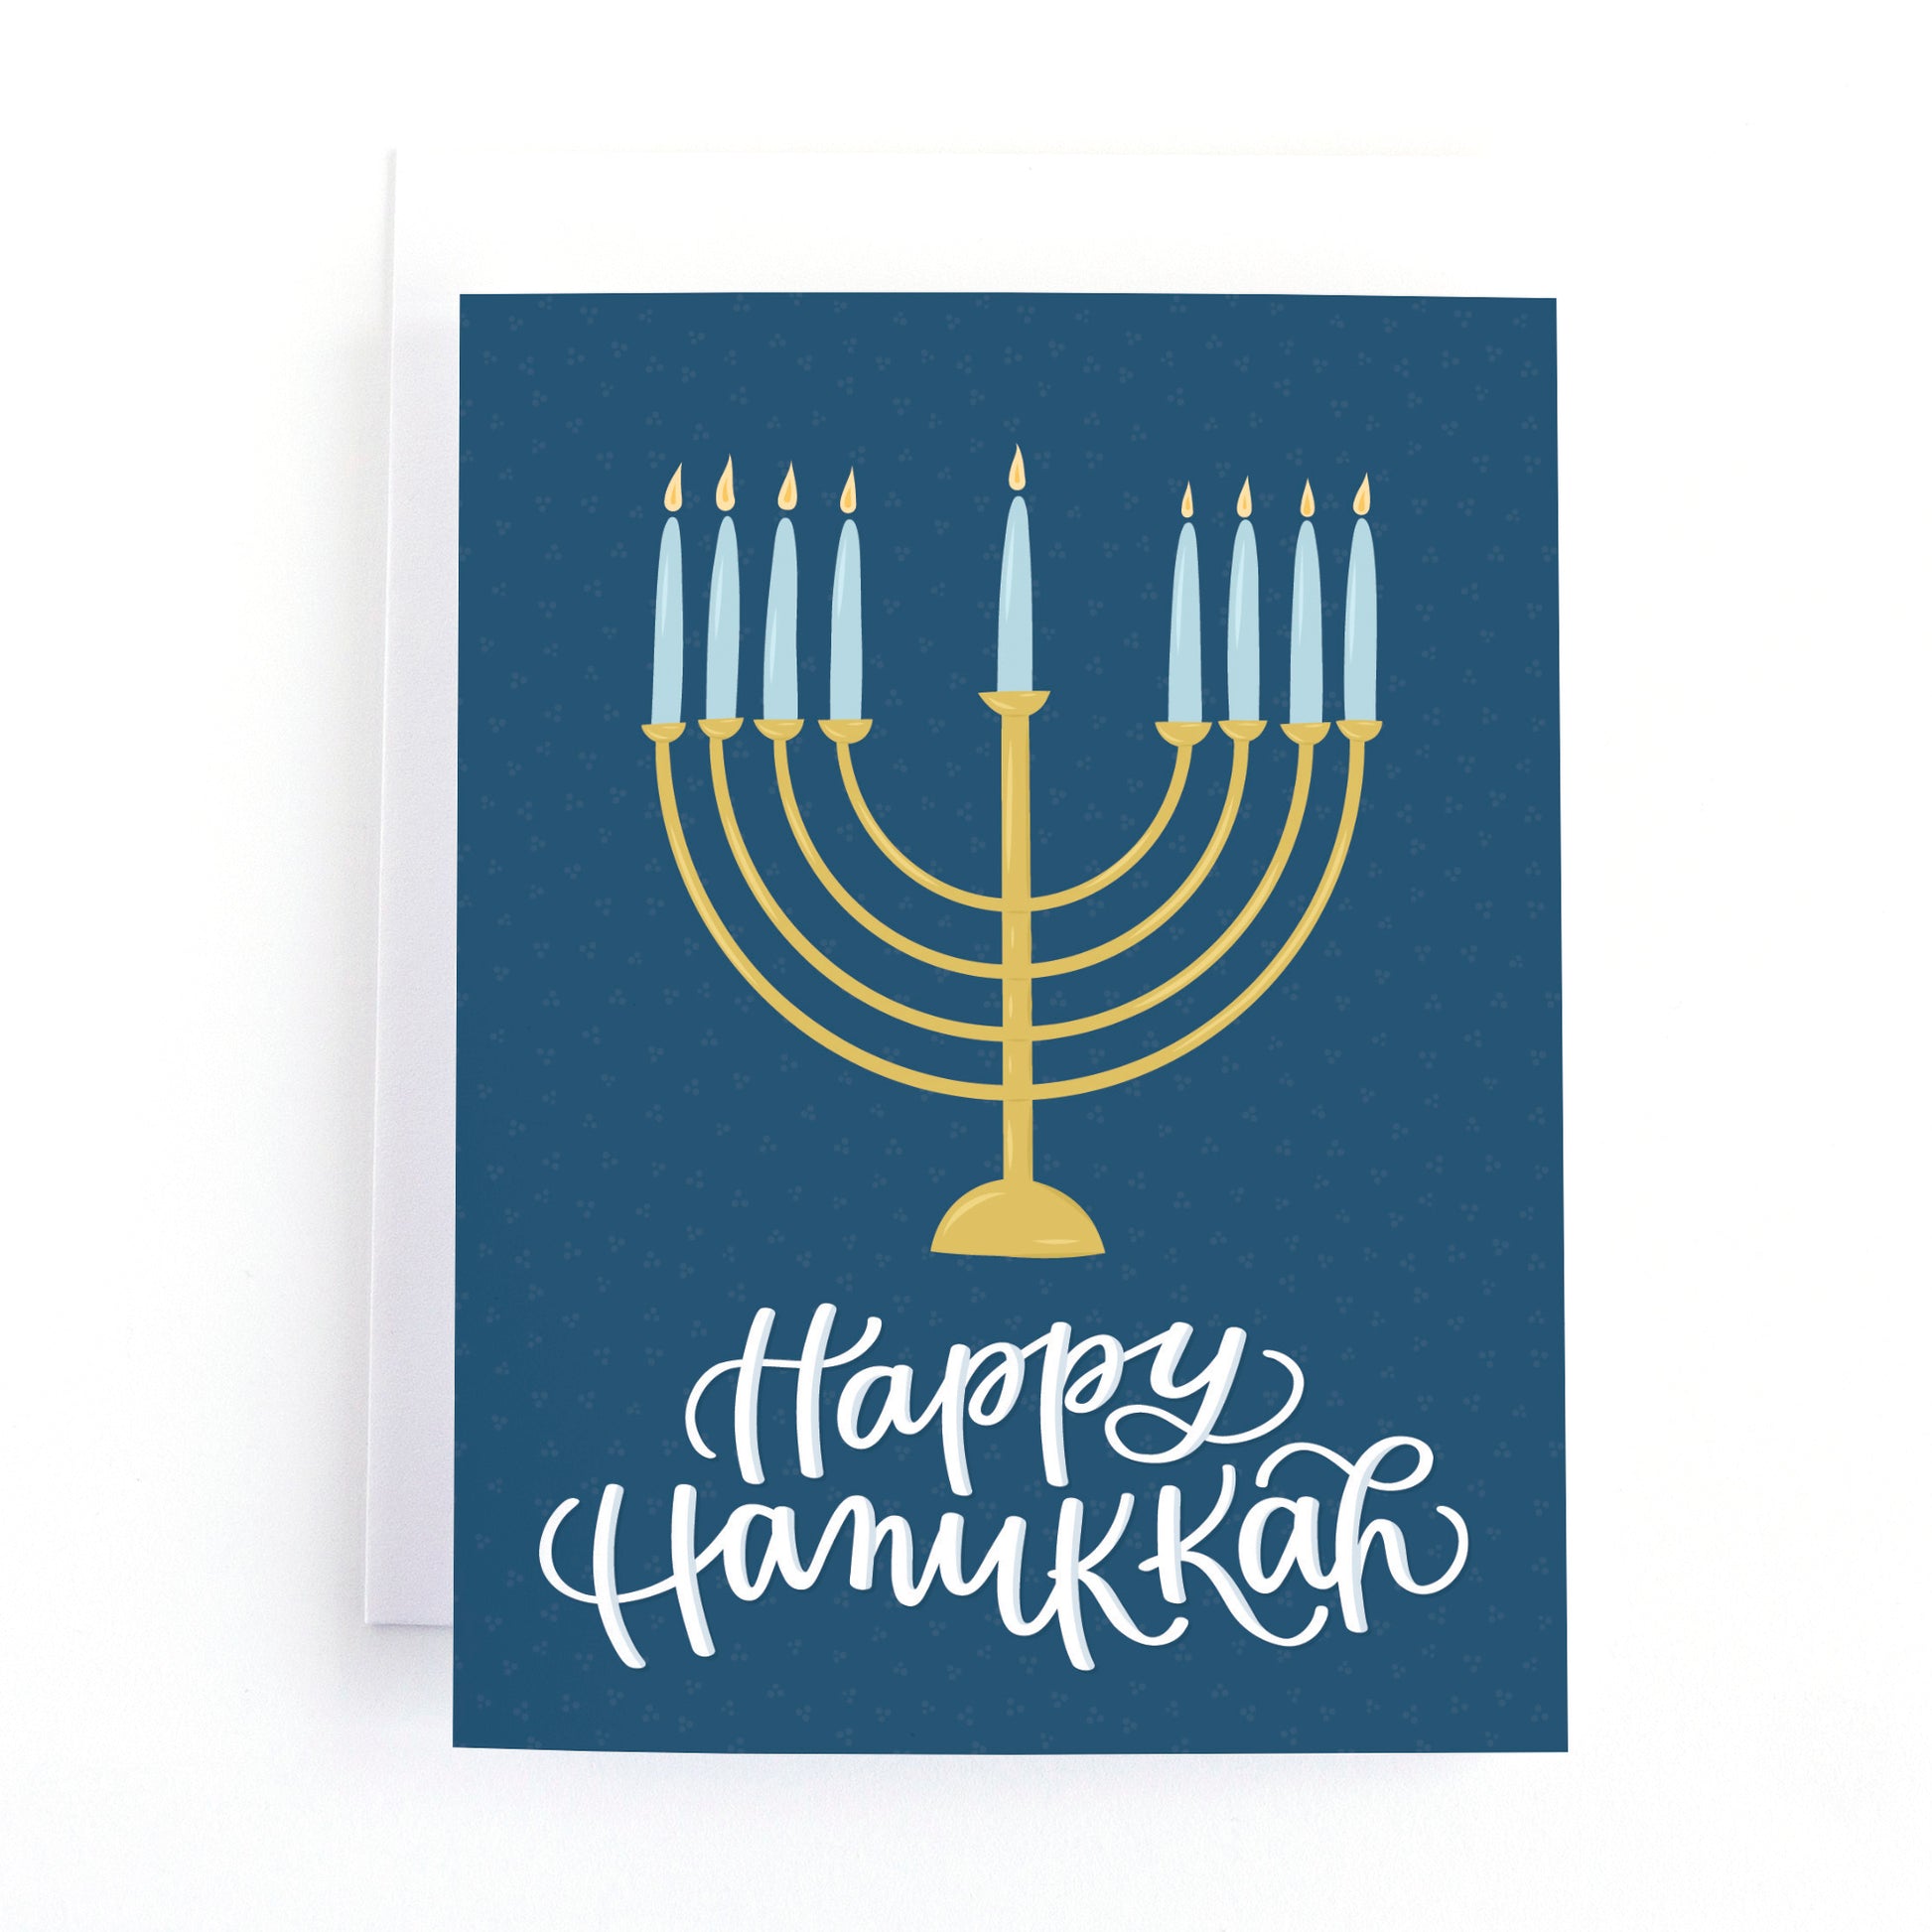 Hanukkah card with a modern gold menorah with lit candles and the hand lettered greeting Happy hanukkah